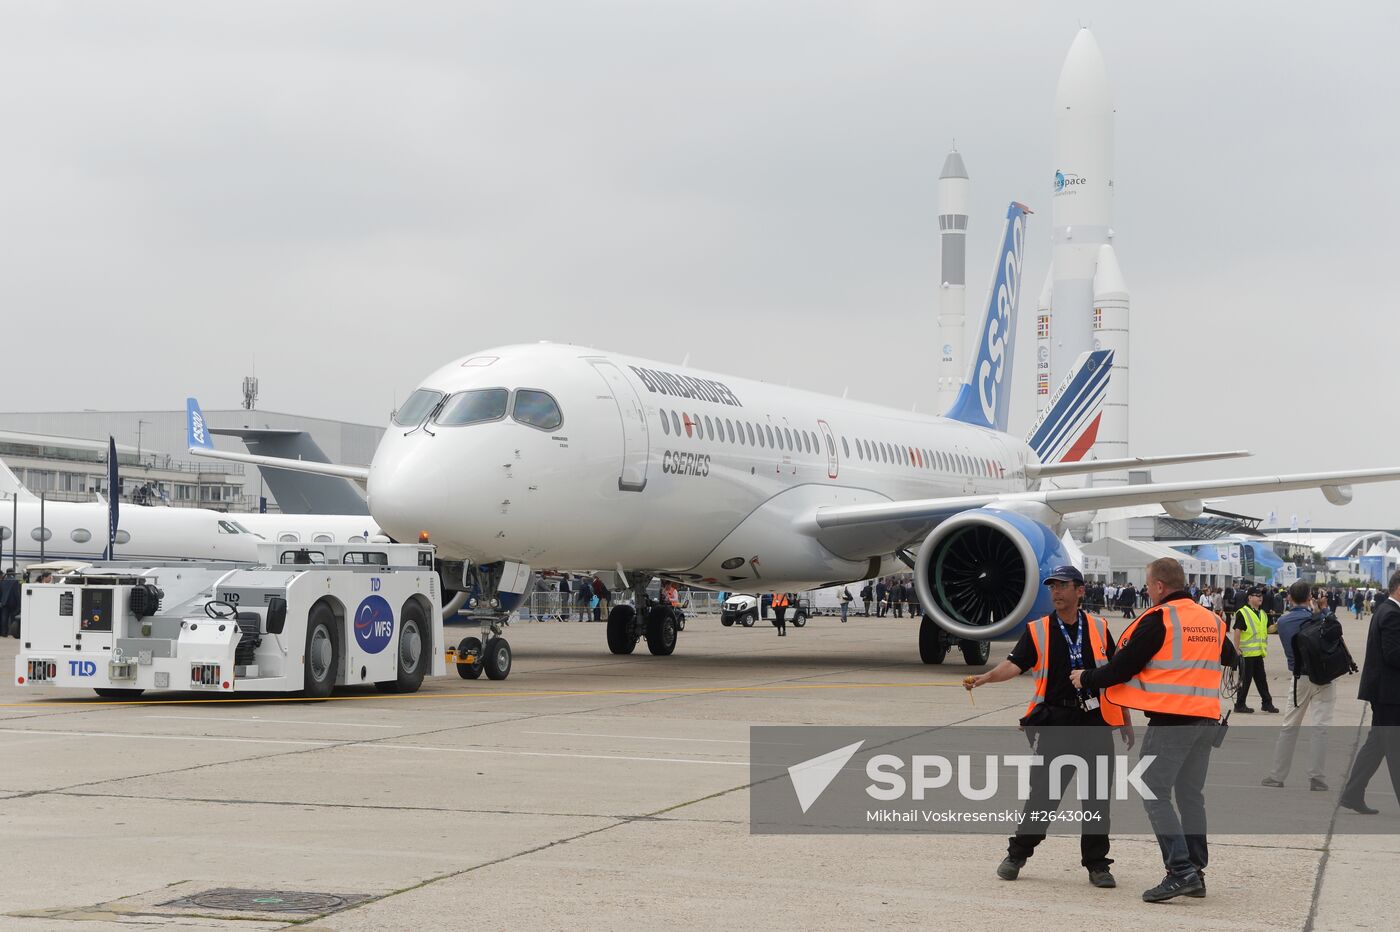 Opening of the International Paris Air Show - Le Bourget 2015